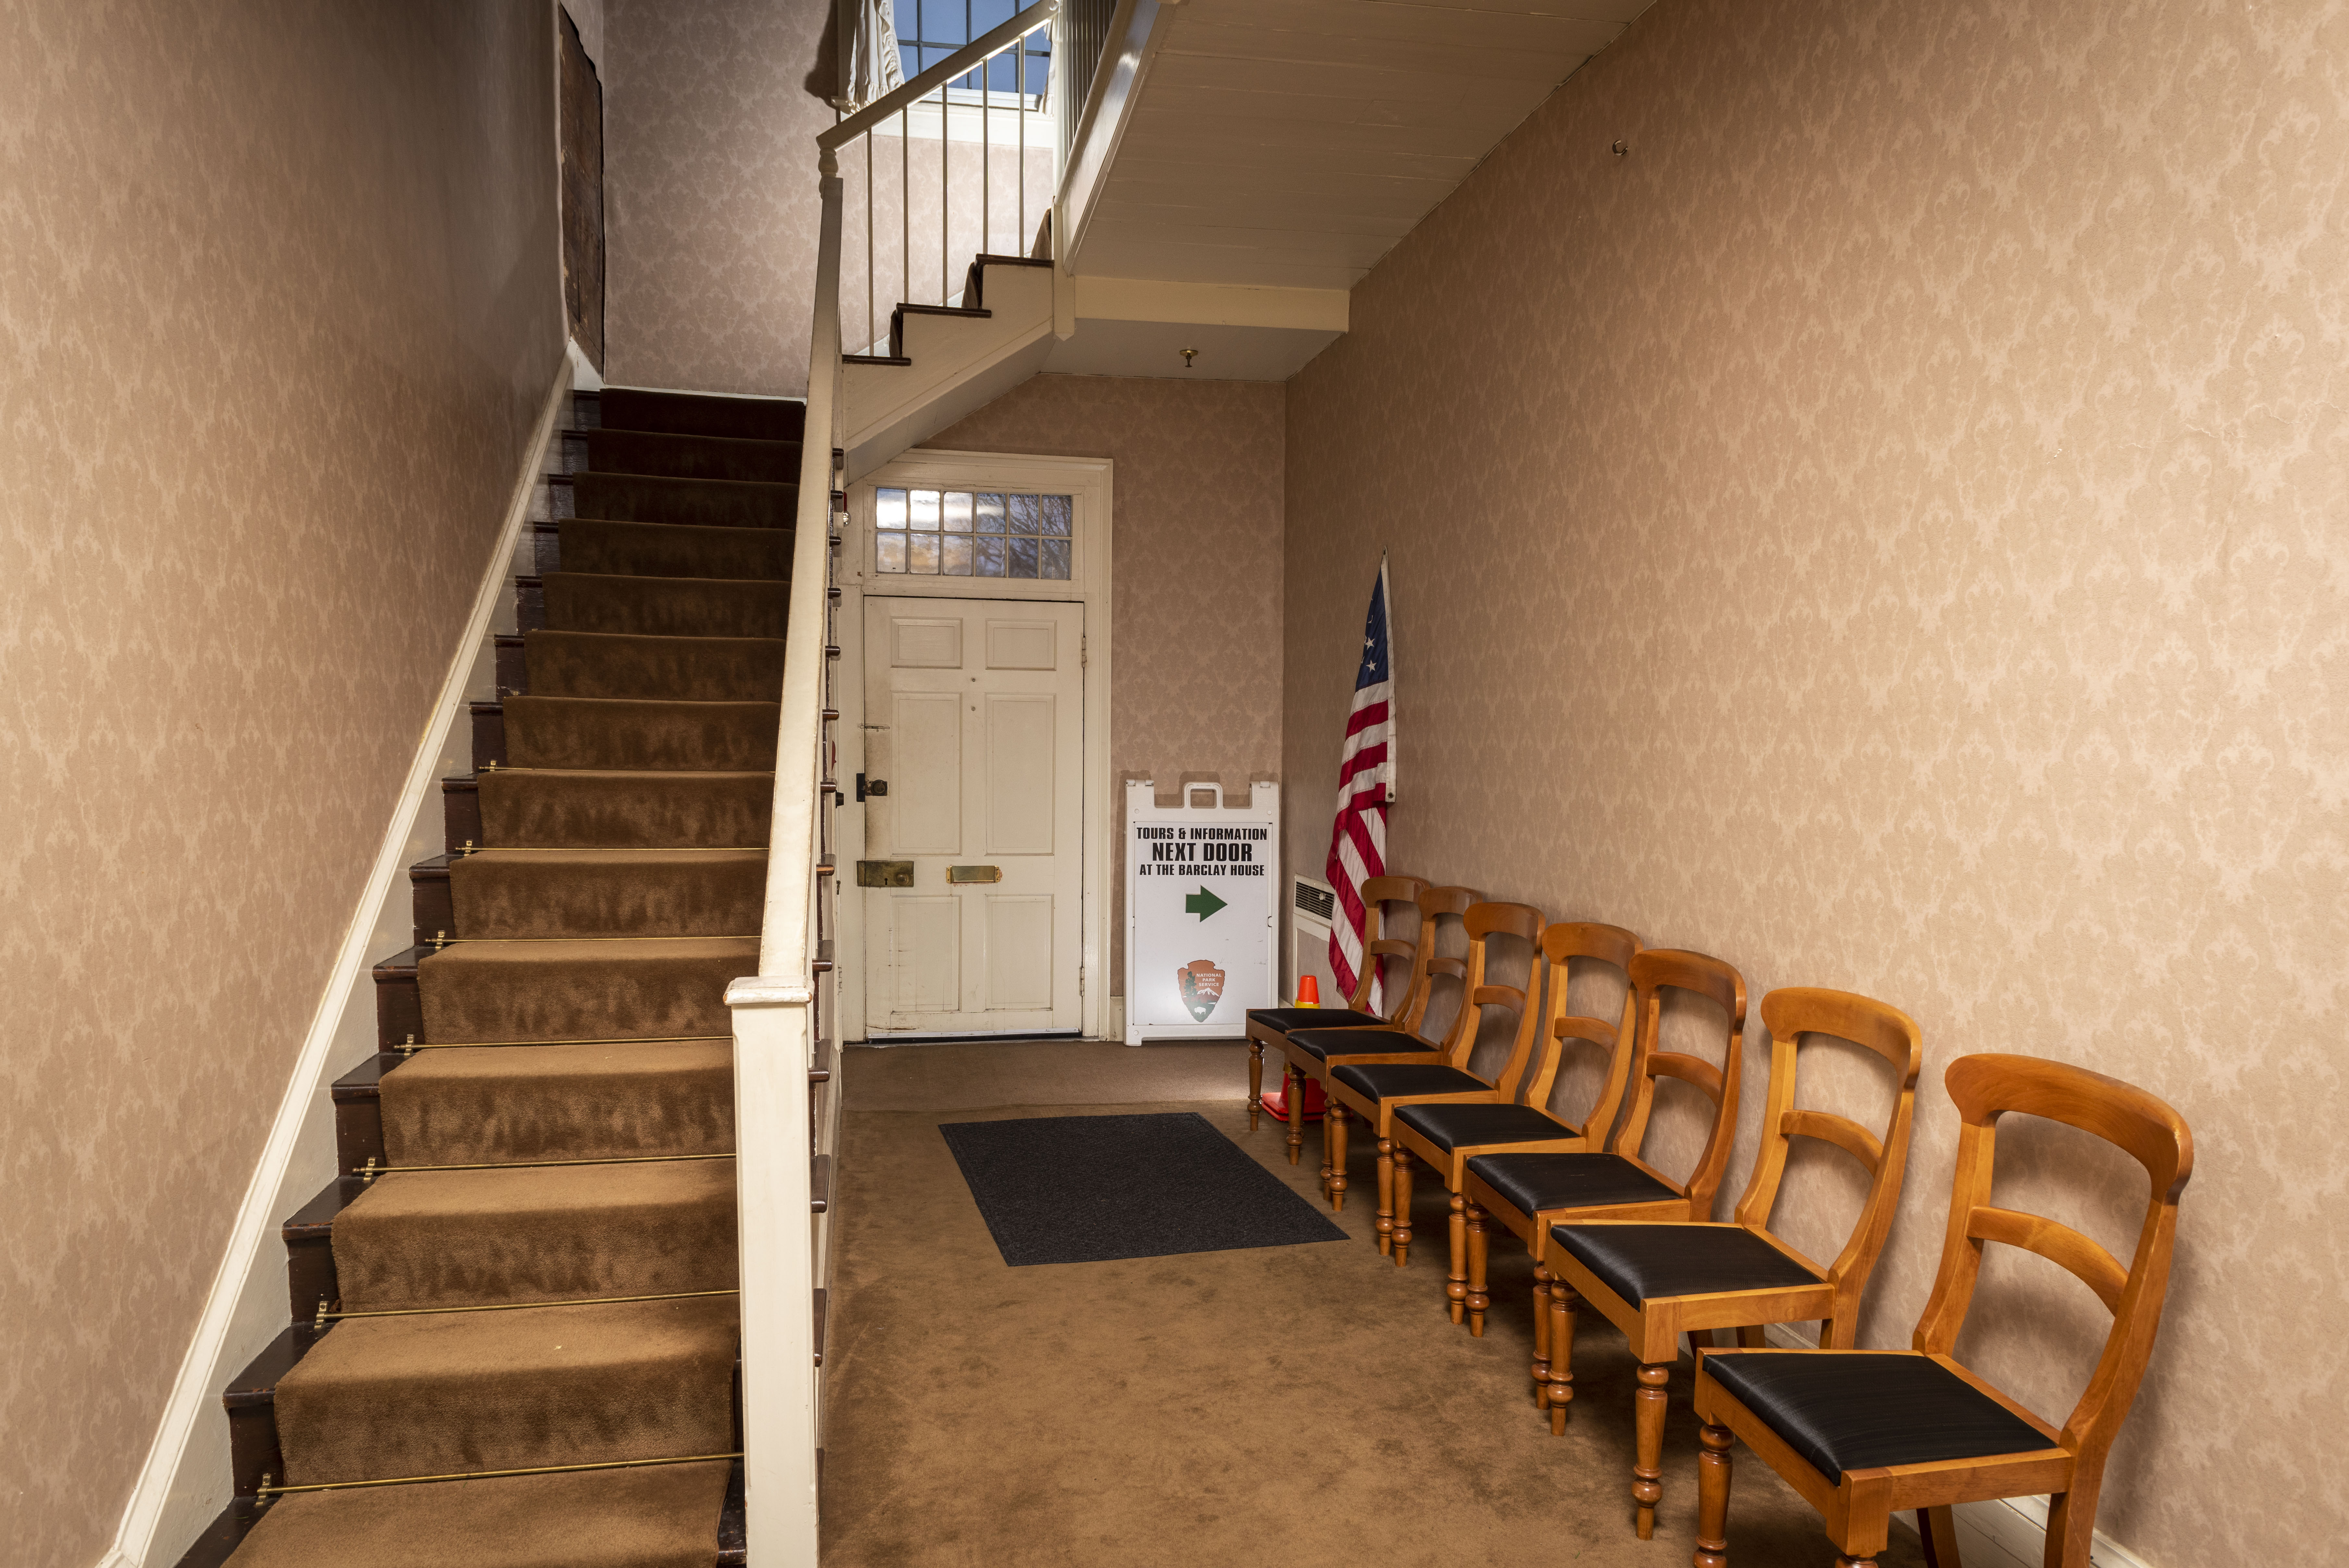 The interior of the McLoughlin House entry hall, facing the stairway to the second floor and the former back door.